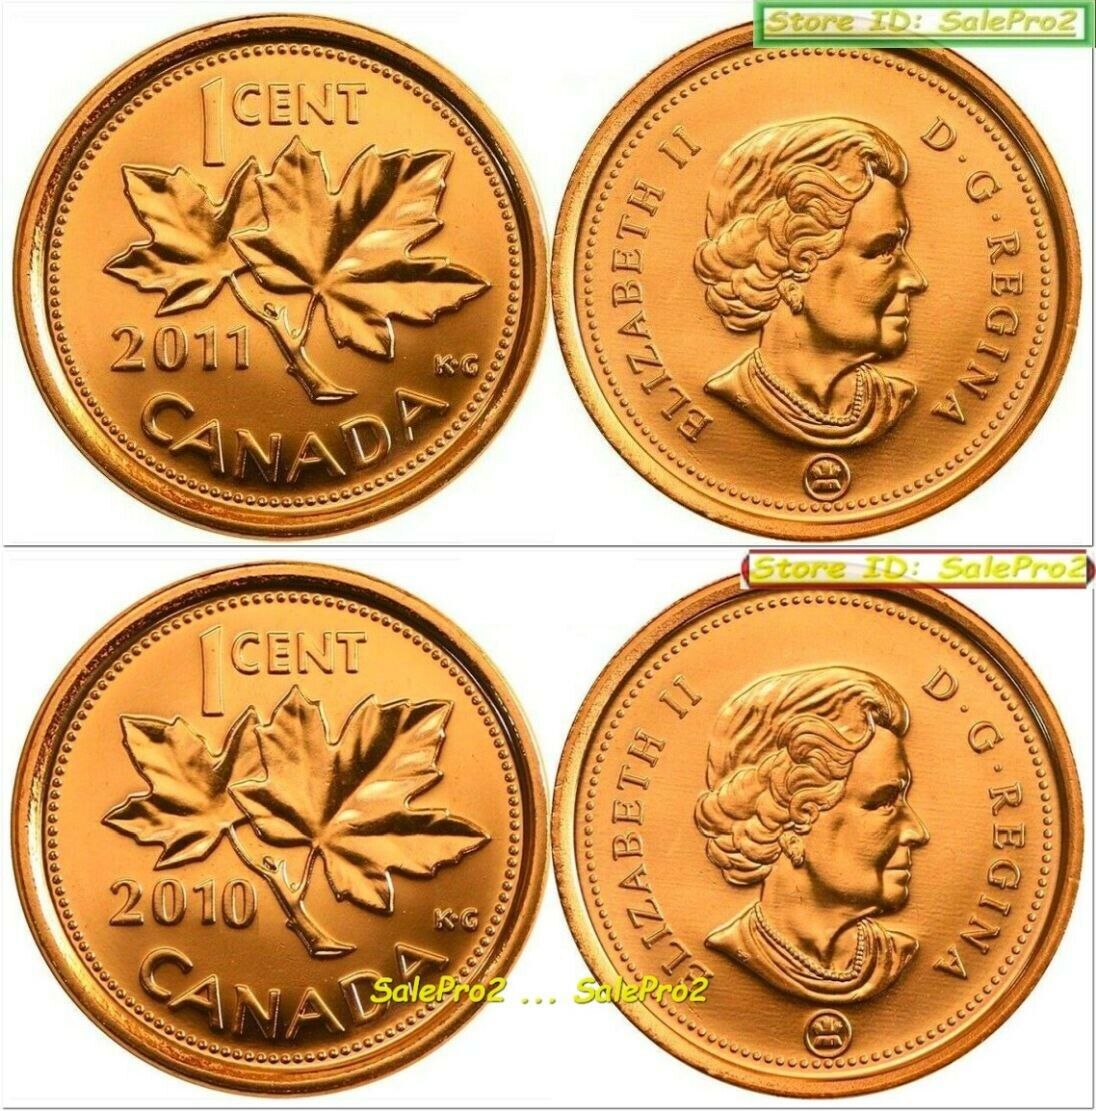 2x CANADA 2010 2011 QUEEN MAPLE LEAF MAGNETIC & NON MAG. CENT PENNY COIN LOT UNC Без бренда